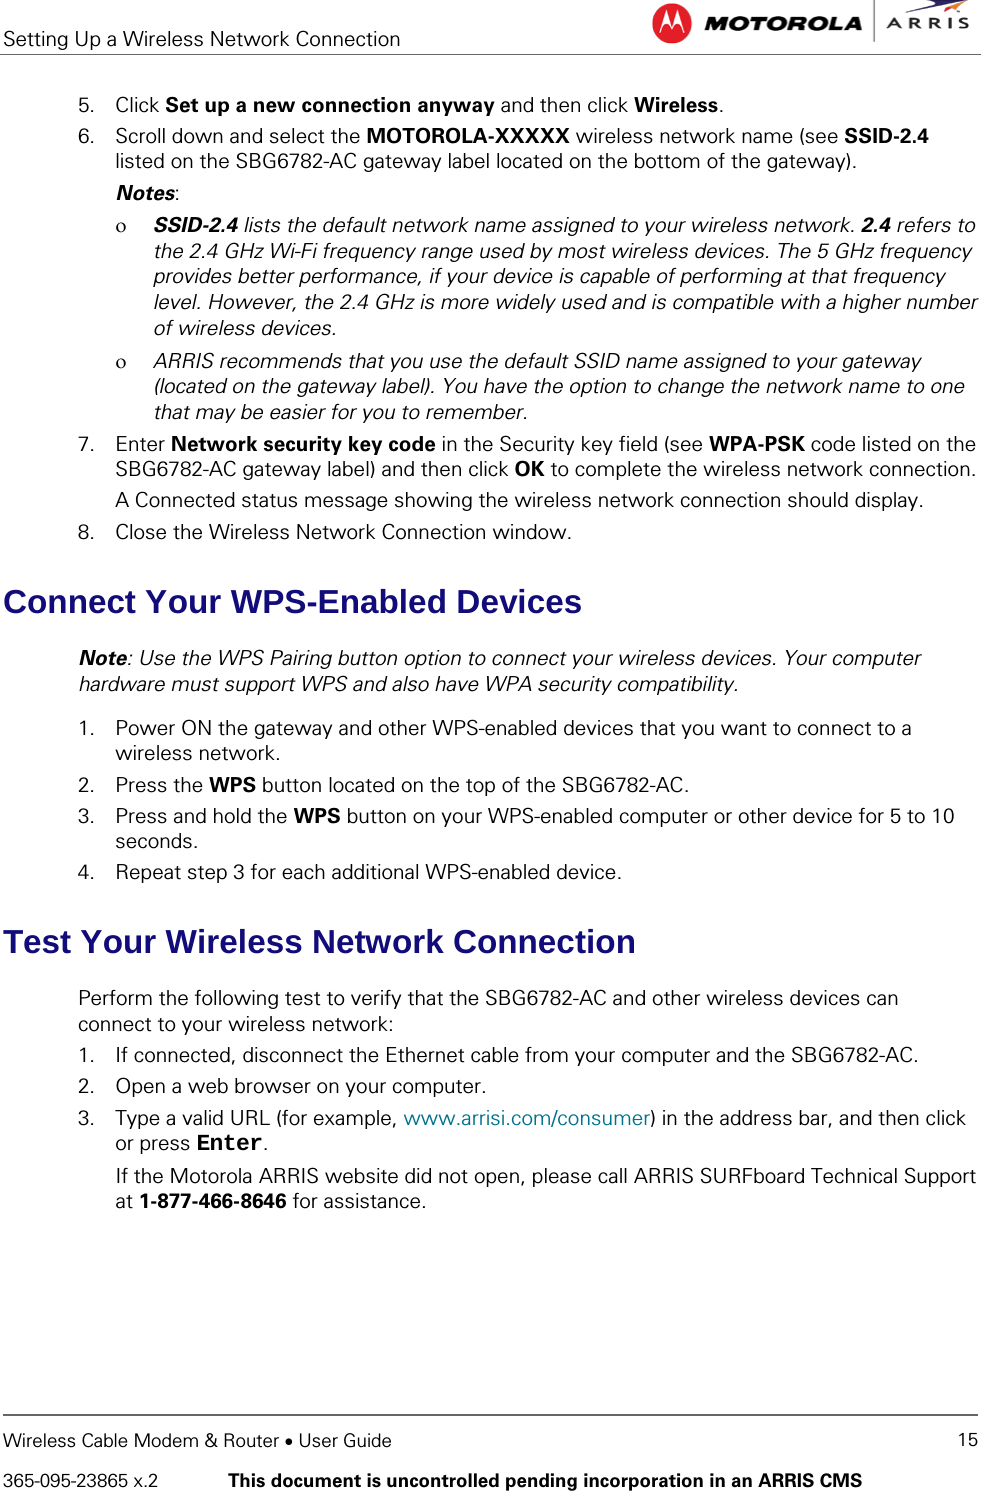 Setting Up a Wireless Network Connection    Wireless Cable Modem &amp; Router • User Guide 15 365-095-23865 x.2   This document is uncontrolled pending incorporation in an ARRIS CMS  5. Click Set up a new connection anyway and then click Wireless. 6. Scroll down and select the MOTOROLA-XXXXX wireless network name (see SSID-2.4 listed on the SBG6782-AC gateway label located on the bottom of the gateway). Notes: ο SSID-2.4 lists the default network name assigned to your wireless network. 2.4 refers to the 2.4 GHz Wi-Fi frequency range used by most wireless devices. The 5 GHz frequency provides better performance, if your device is capable of performing at that frequency level. However, the 2.4 GHz is more widely used and is compatible with a higher number of wireless devices. ο ARRIS recommends that you use the default SSID name assigned to your gateway (located on the gateway label). You have the option to change the network name to one that may be easier for you to remember. 7. Enter Network security key code in the Security key field (see WPA-PSK code listed on the SBG6782-AC gateway label) and then click OK to complete the wireless network connection. A Connected status message showing the wireless network connection should display. 8. Close the Wireless Network Connection window. Connect Your WPS-Enabled Devices Note: Use the WPS Pairing button option to connect your wireless devices. Your computer hardware must support WPS and also have WPA security compatibility. 1. Power ON the gateway and other WPS-enabled devices that you want to connect to a wireless network. 2. Press the WPS button located on the top of the SBG6782-AC. 3. Press and hold the WPS button on your WPS-enabled computer or other device for 5 to 10 seconds. 4. Repeat step 3 for each additional WPS-enabled device. Test Your Wireless Network Connection Perform the following test to verify that the SBG6782-AC and other wireless devices can connect to your wireless network: 1. If connected, disconnect the Ethernet cable from your computer and the SBG6782-AC. 2. Open a web browser on your computer.  3. Type a valid URL (for example, www.arrisi.com/consumer) in the address bar, and then click or press Enter. If the Motorola ARRIS website did not open, please call ARRIS SURFboard Technical Support at 1-877-466-8646 for assistance.  